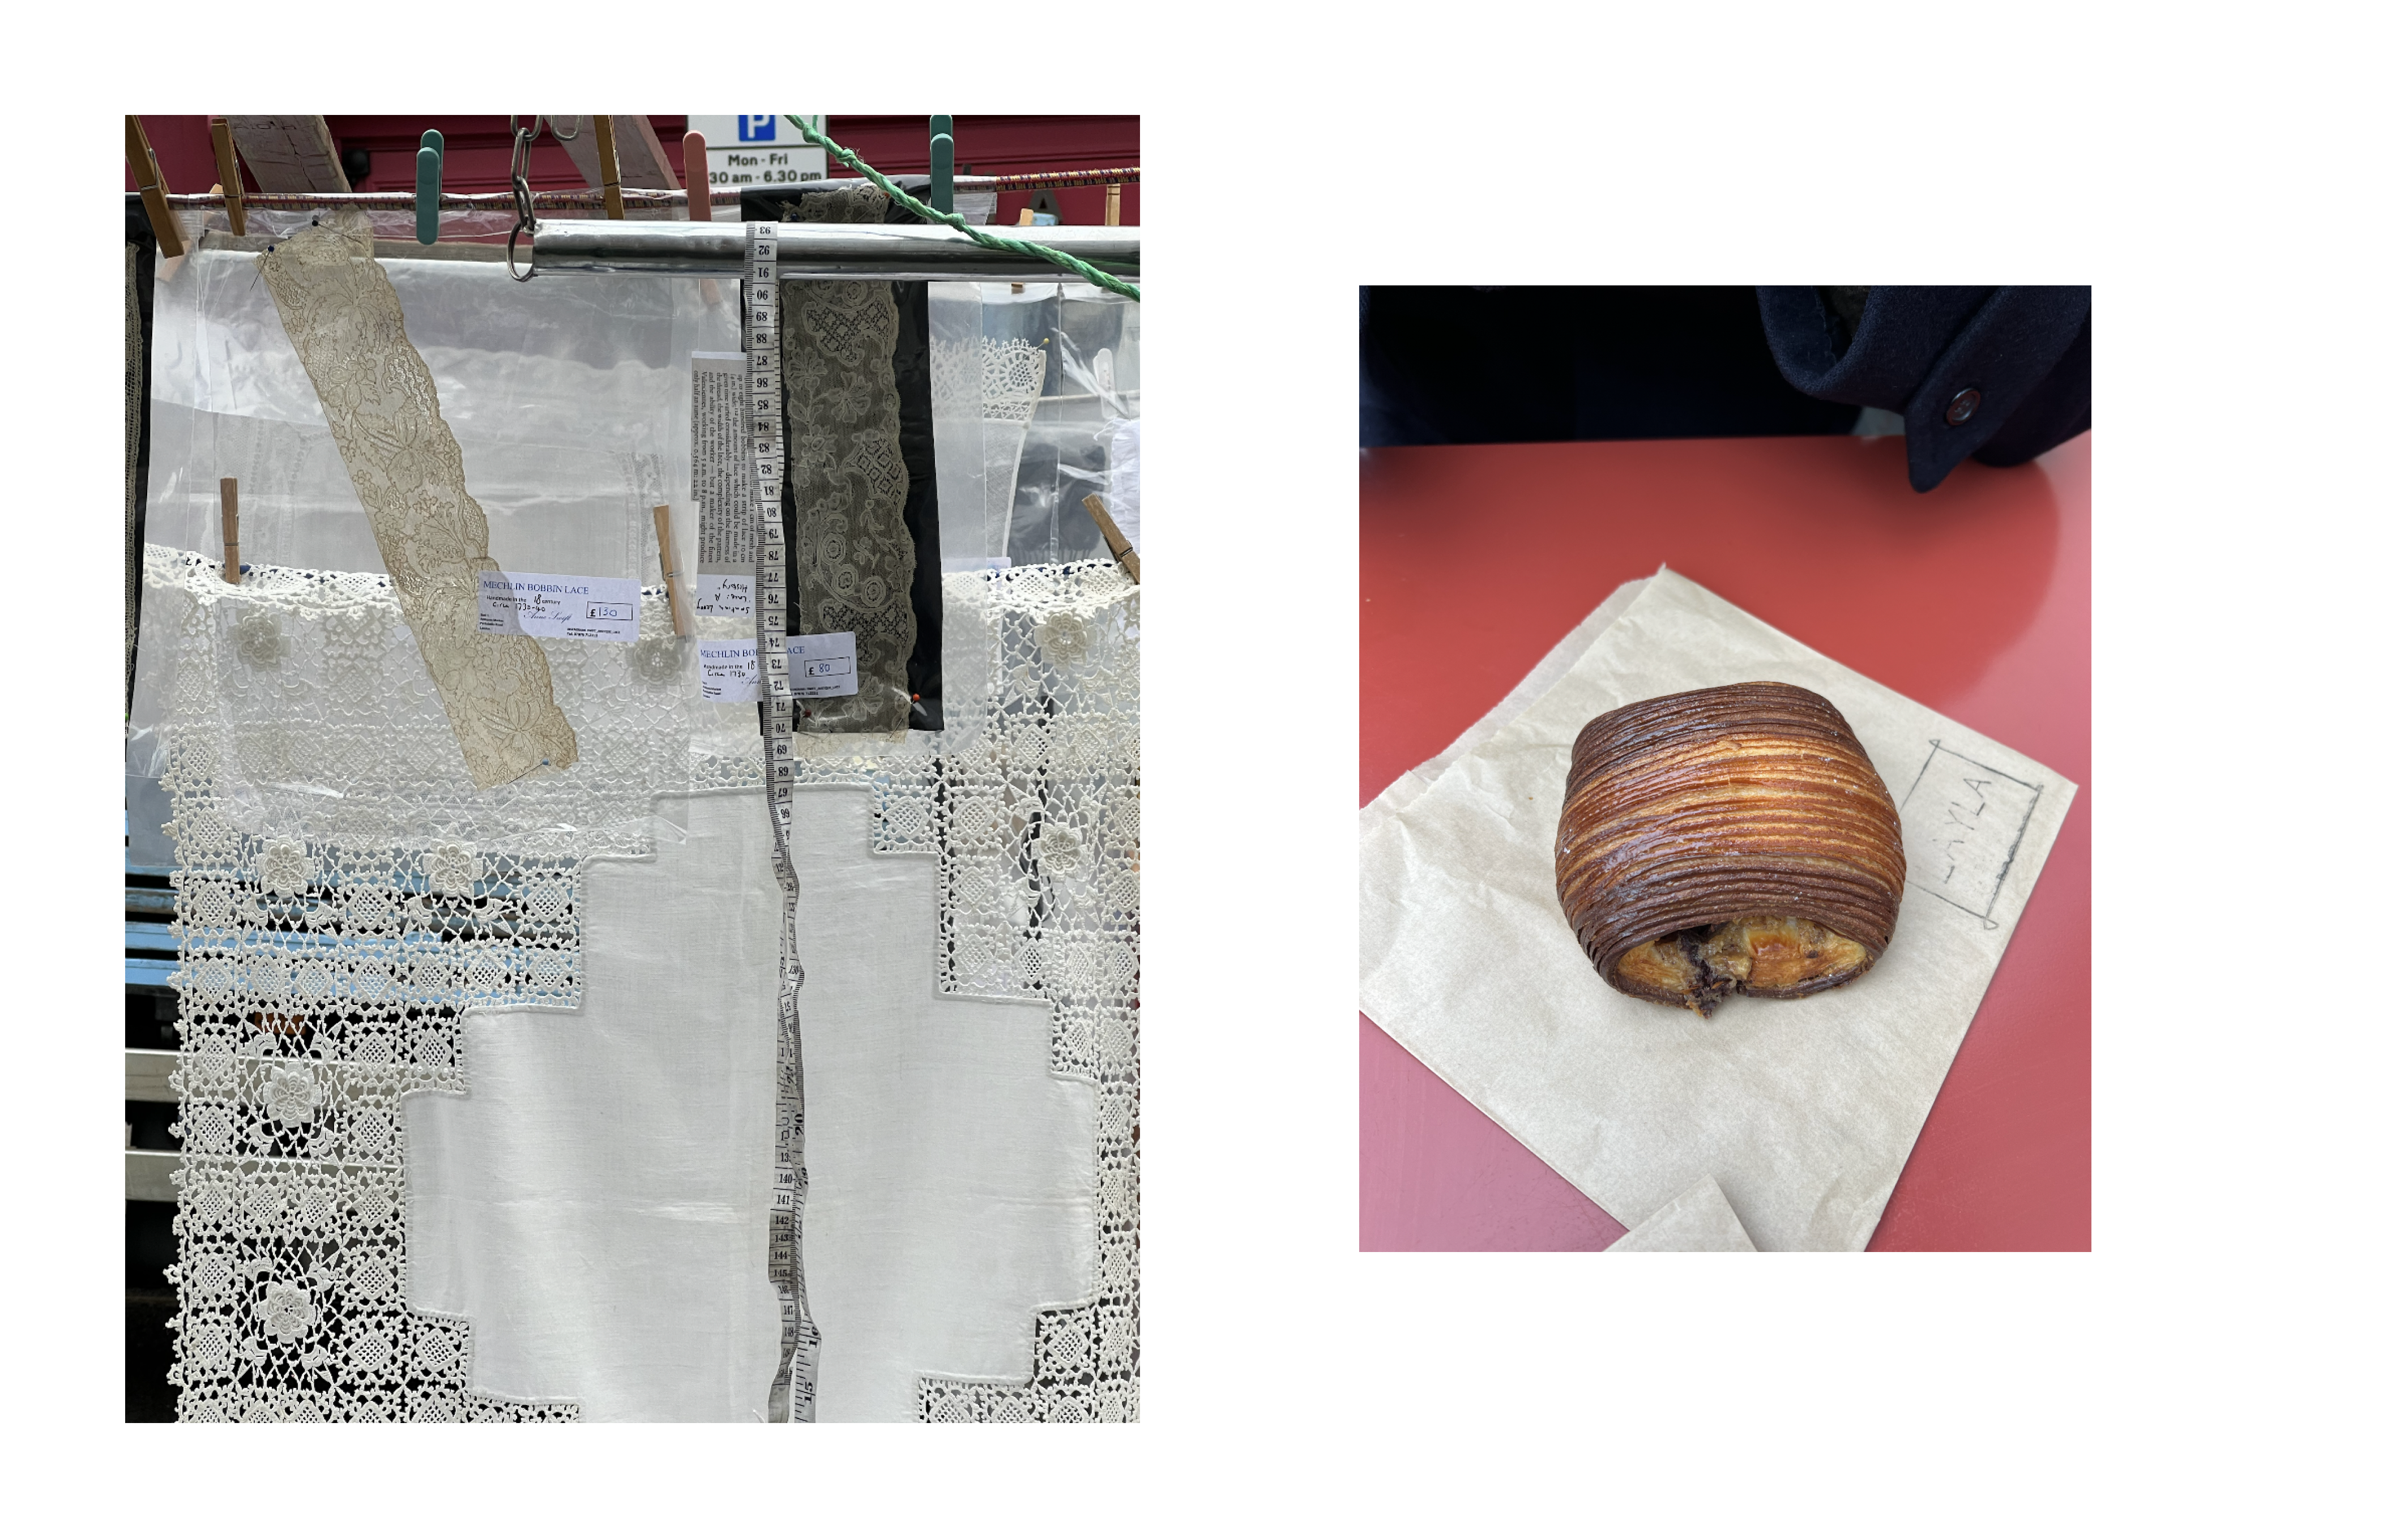 Always on the hunt for new treasures! To the left, beautiful lace cloths found on Portobello Road Market and to the right a perfect pastry from Layla Bakery.